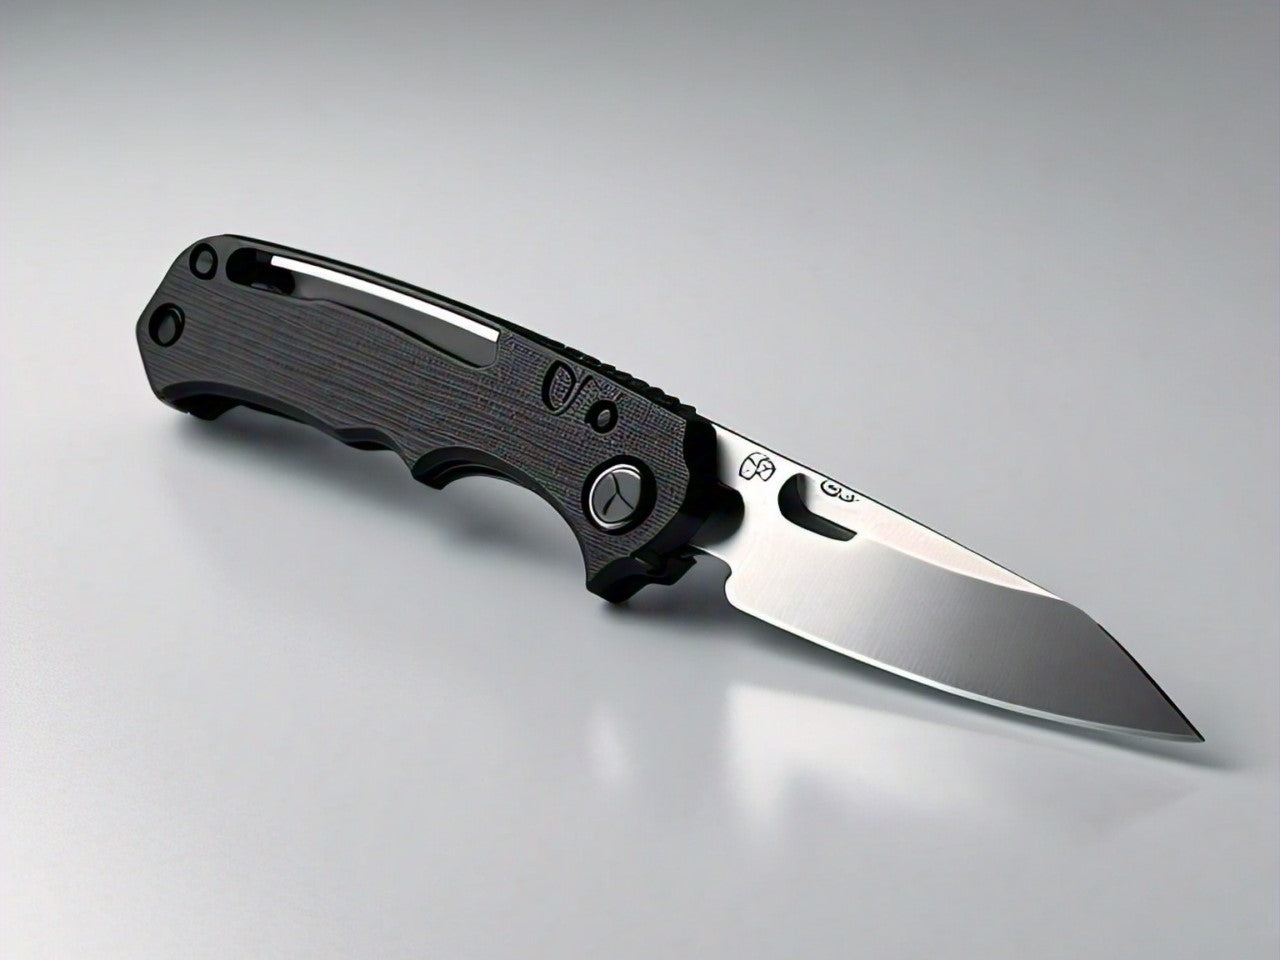 OTF Knife Vs. Folding Knife: Which is Better for Your Needs?